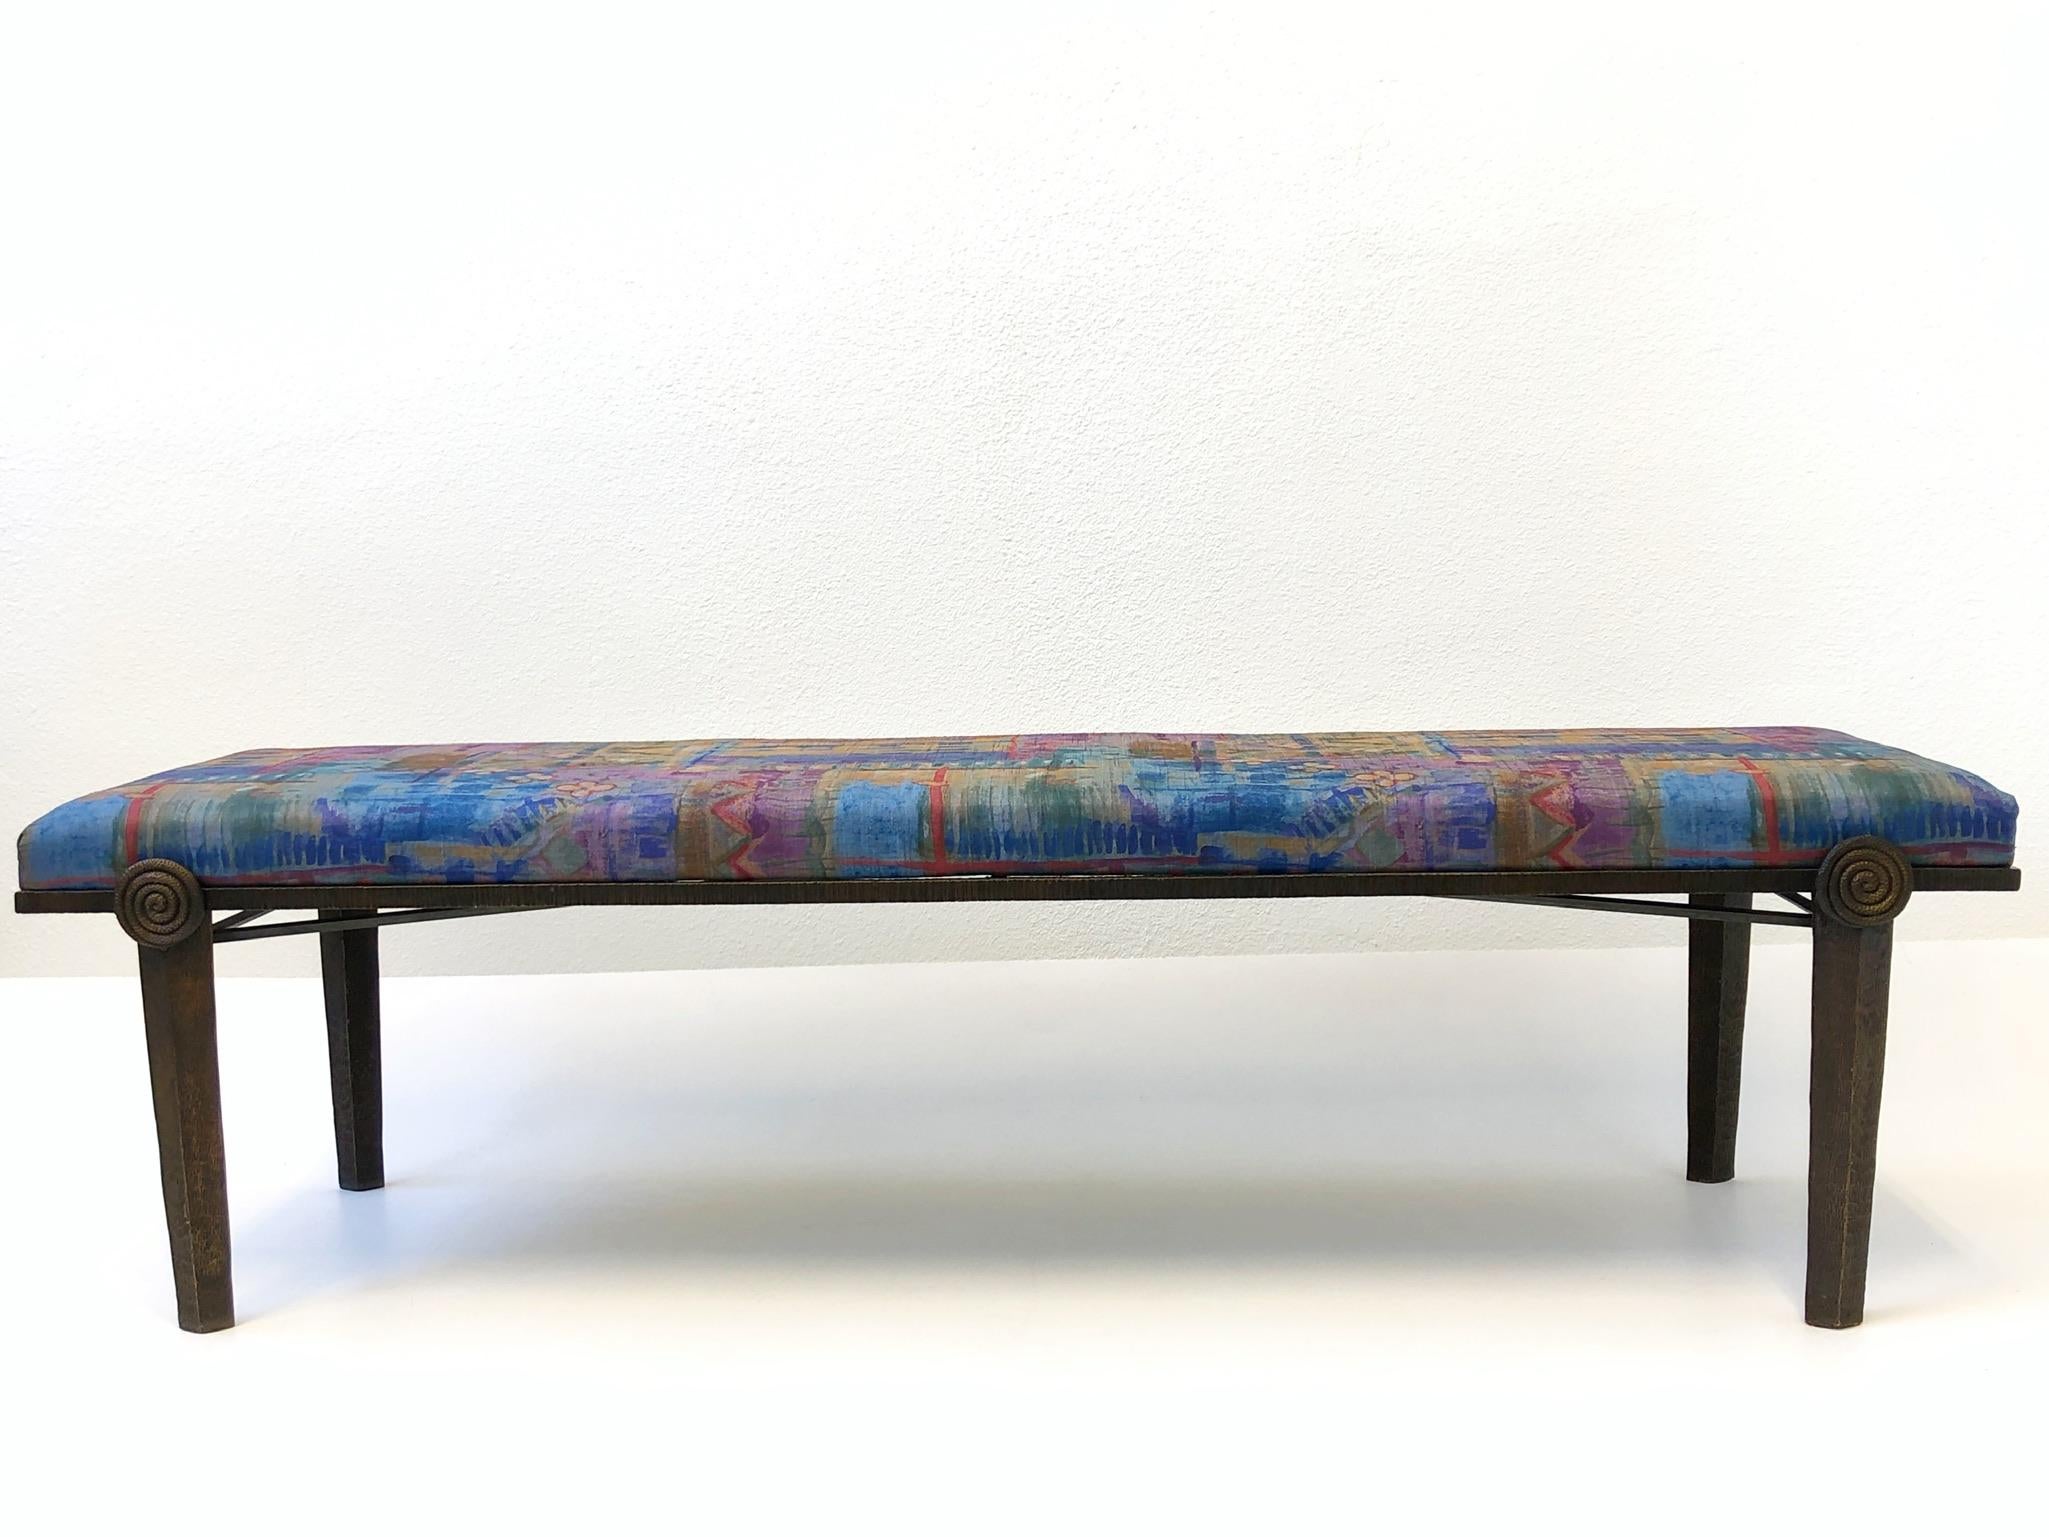 A spectacular Brutalist bronze bench designed by Tom Corbin for Steve Chase. The bench retains original fabric chosen by Steve Chase. The bench is constructed of solid aged bronze.

Measurements: 66.25” wide, 18.75” deep, 18.5” high.